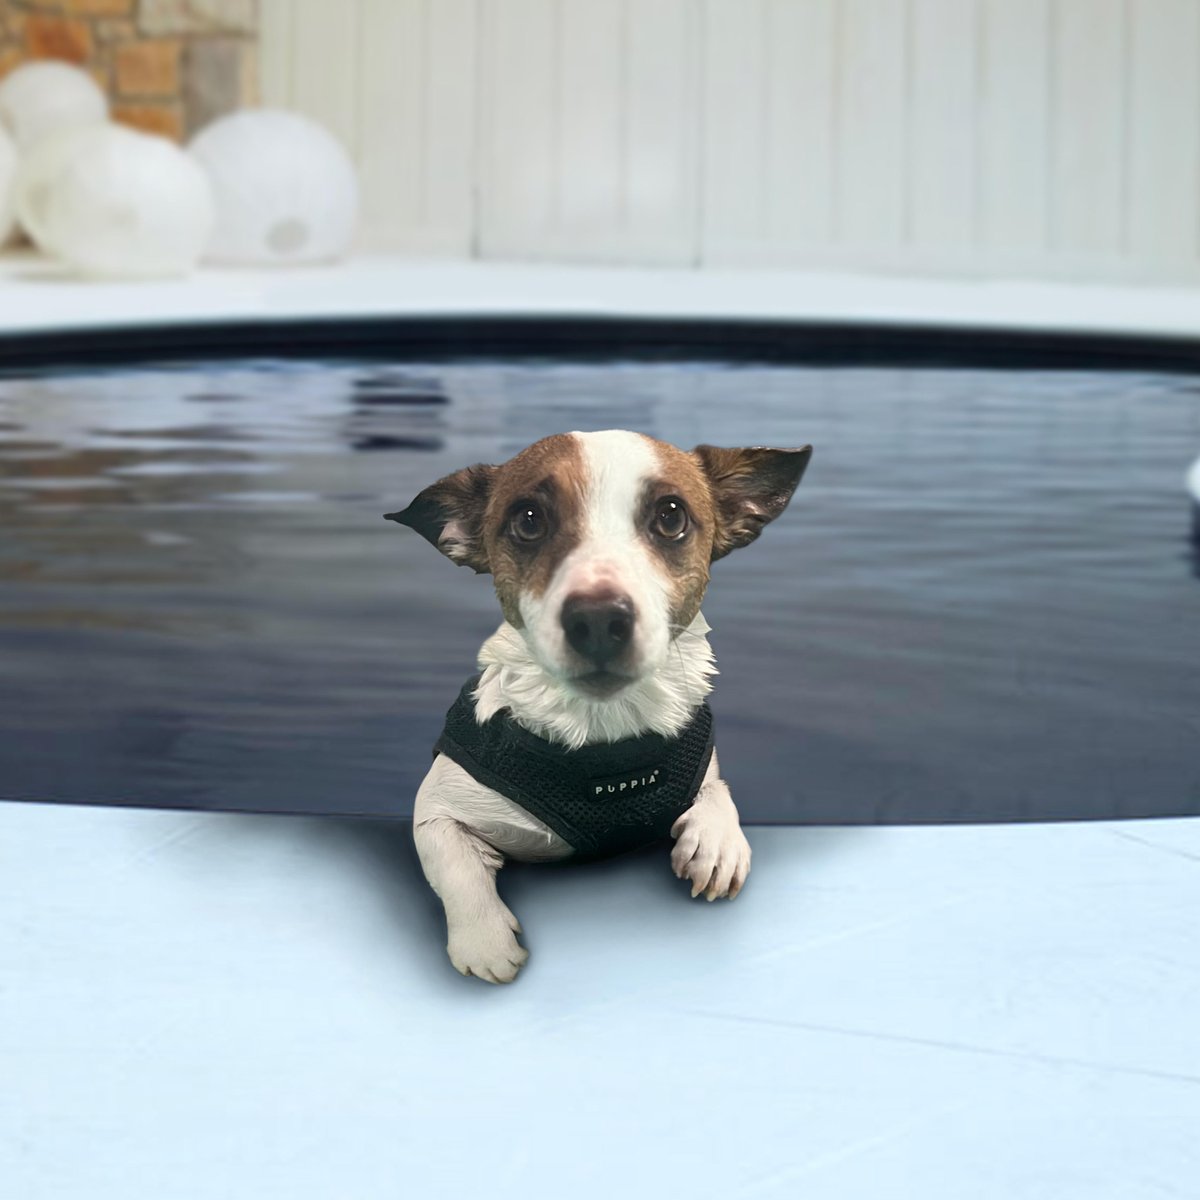 Hurry hooman am waiting for you 🥰

#goodboy #jrt #jackrussell #jackrussellterrier #dogs #cutedog #weeklyfluff #weratedogs #doggos #dogspictures #barked #9gagcute #aww